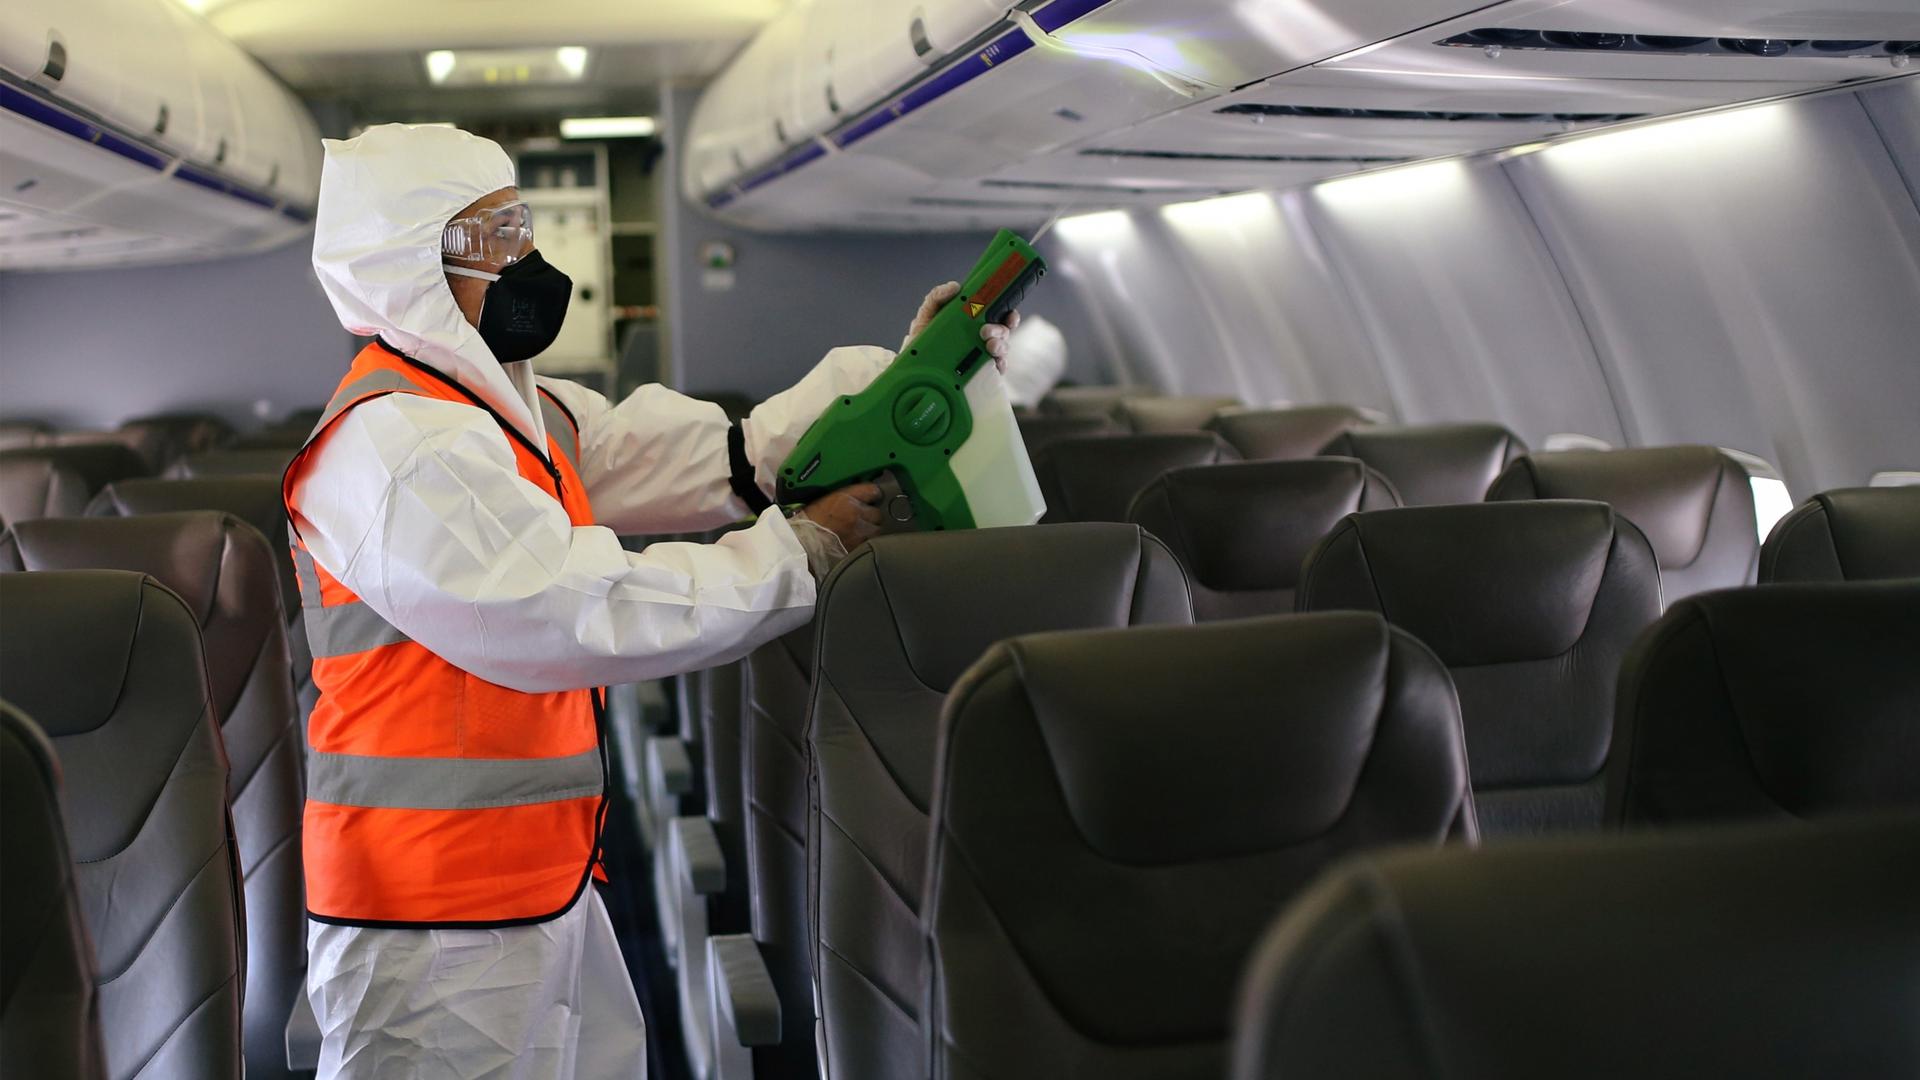 A person wearing a hazmat suit appears cleaning inside an airplane.